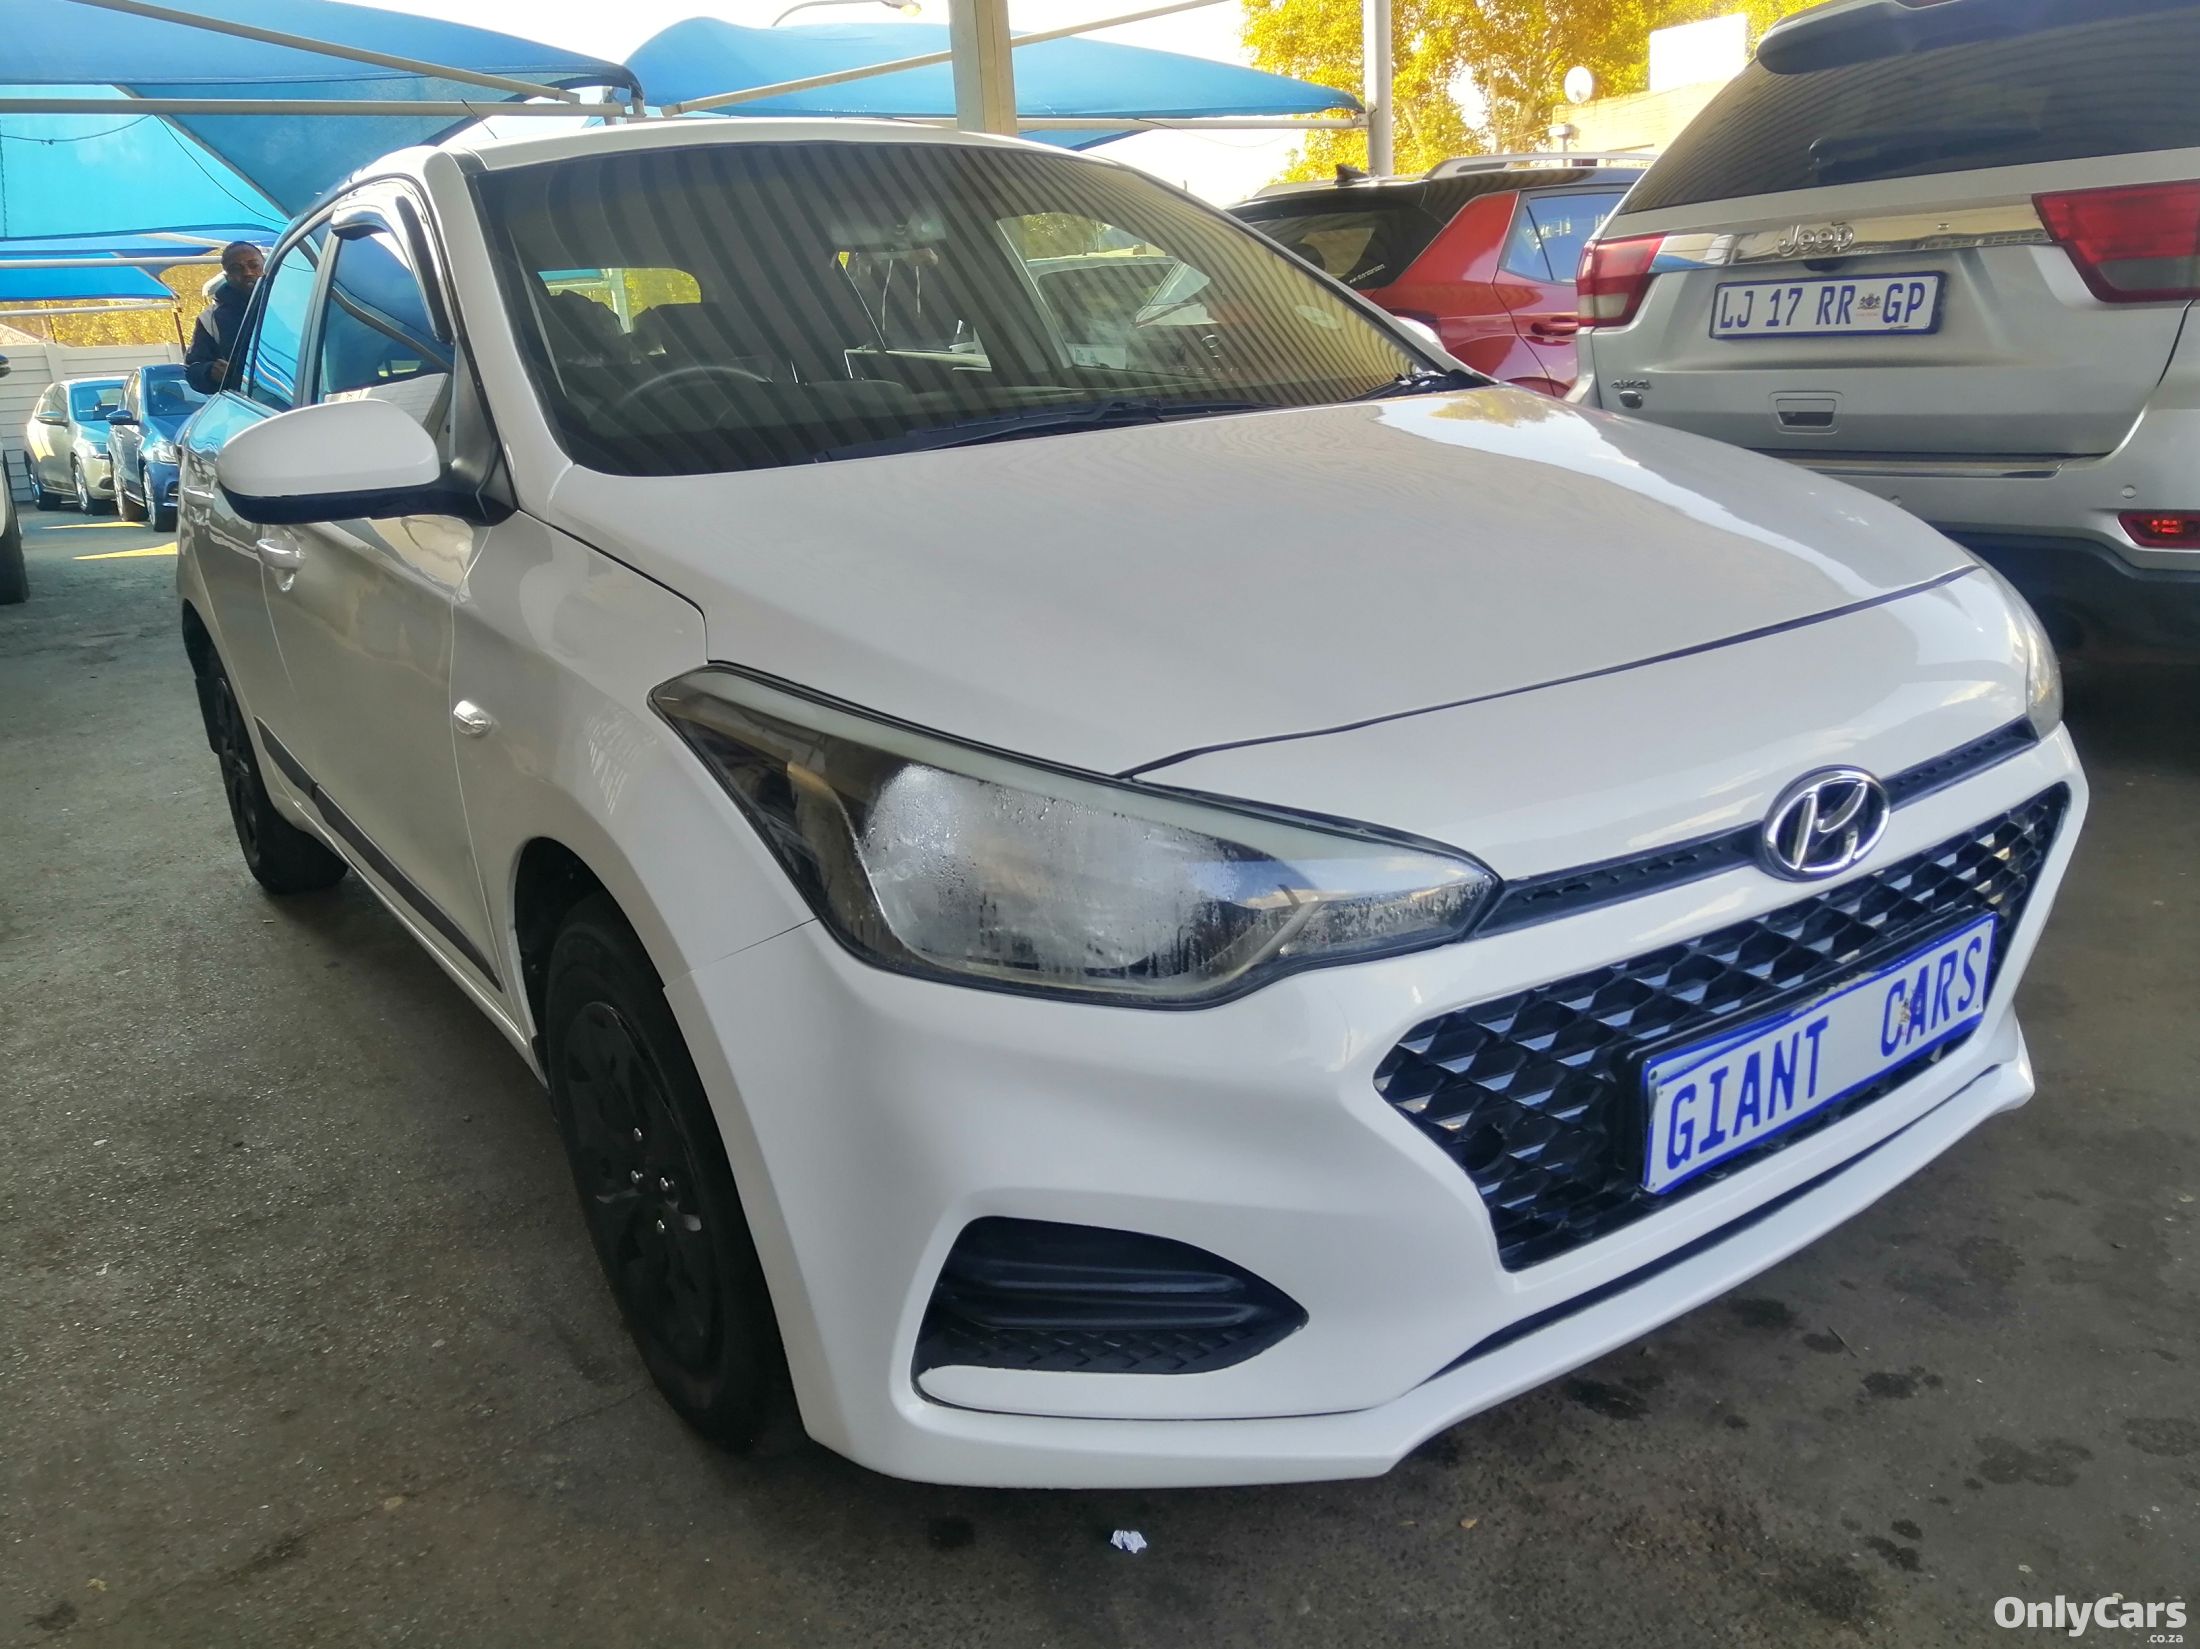 2020 Hyundai I20 used car for sale in Johannesburg South Gauteng South Africa - OnlyCars.co.za